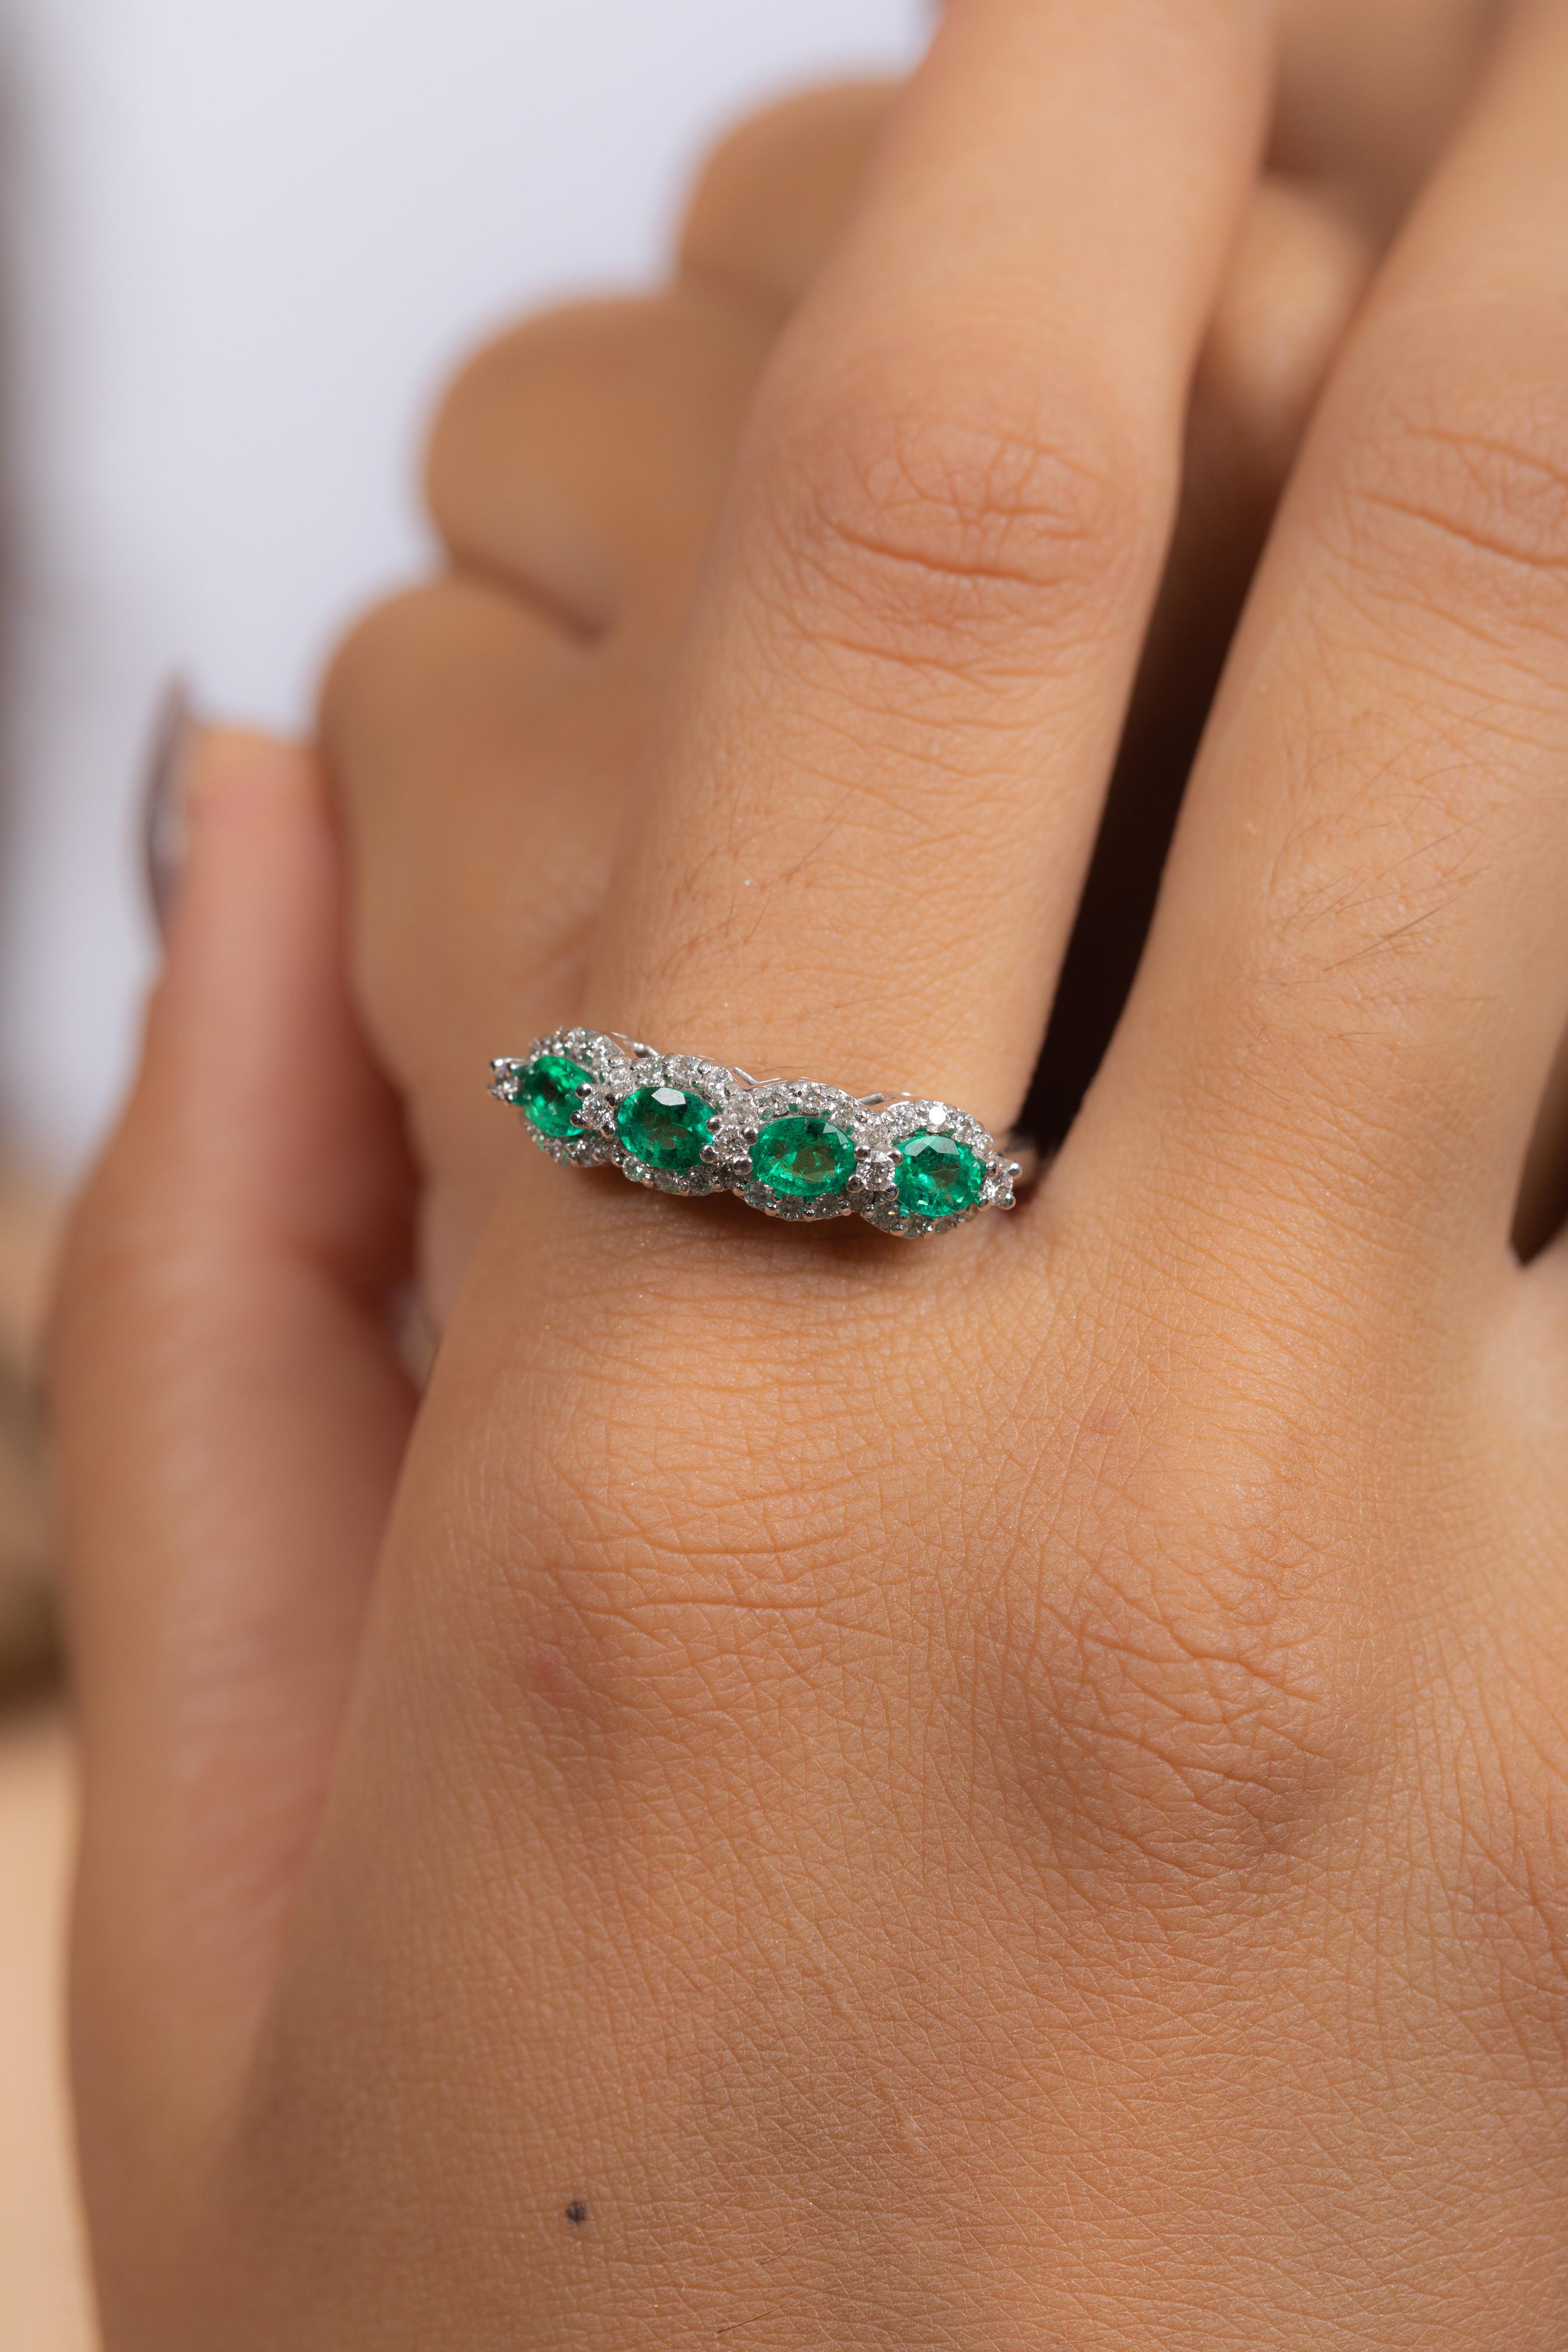 For Sale:  18K White Gold Emerald and Diamond Ring  2